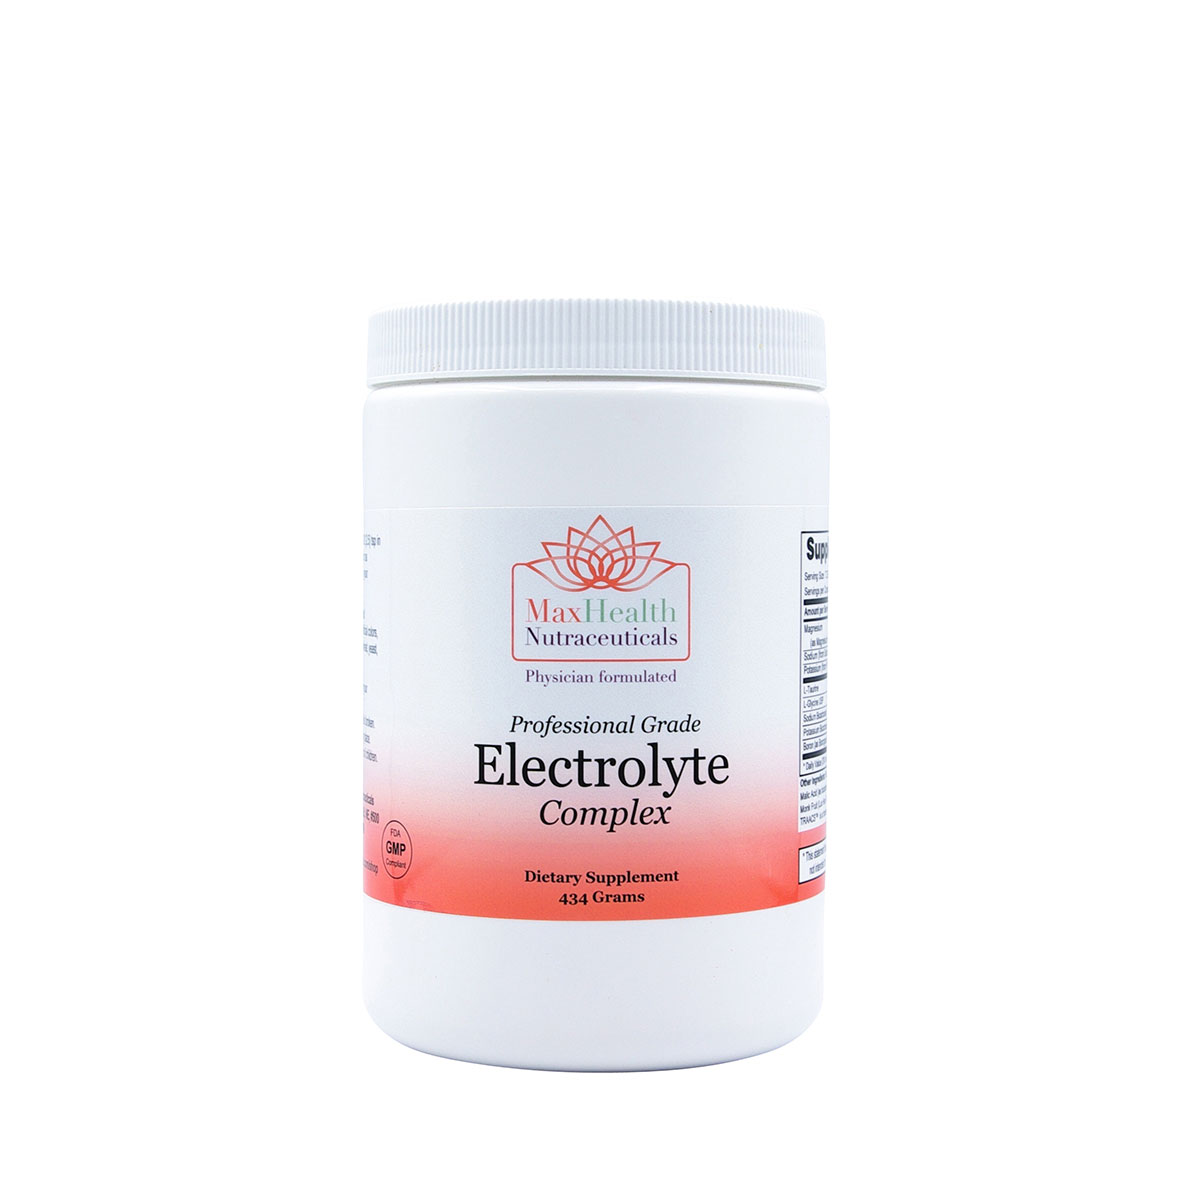 11Professional Grade Electrolyte Complex